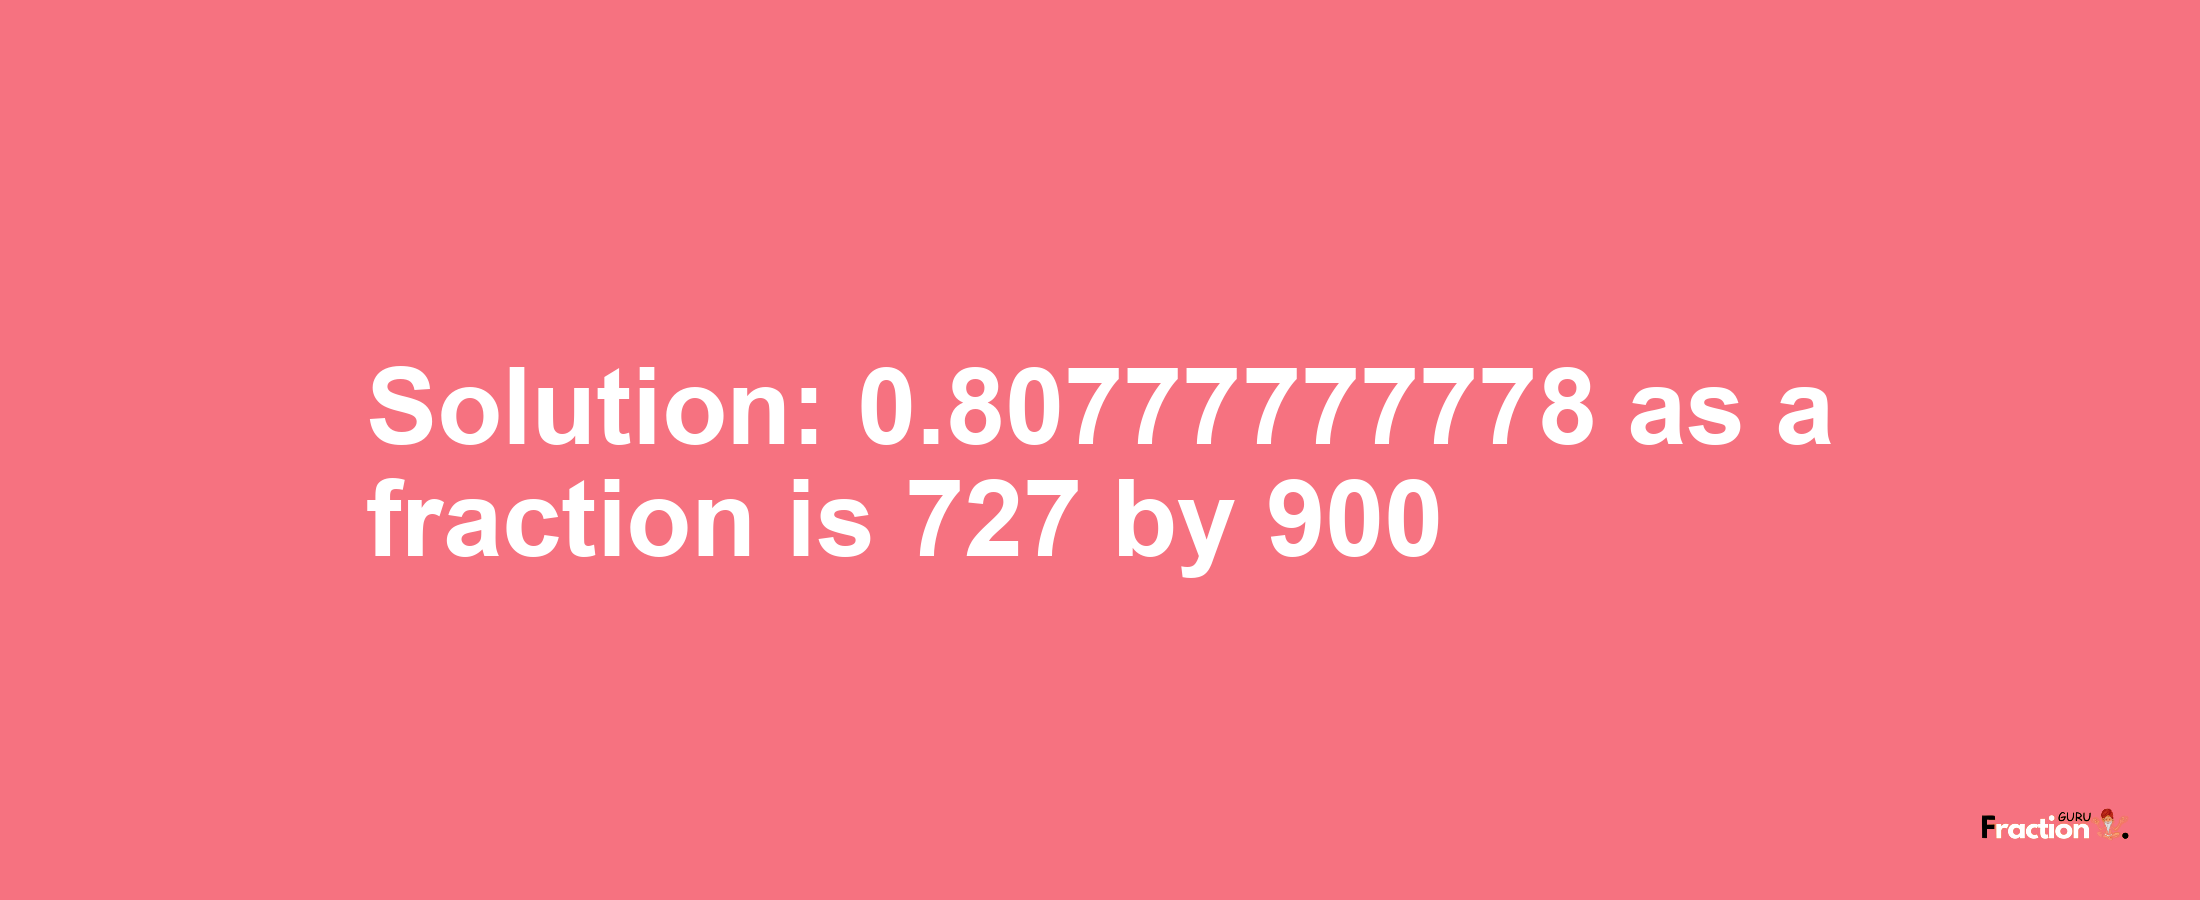 Solution:0.80777777778 as a fraction is 727/900